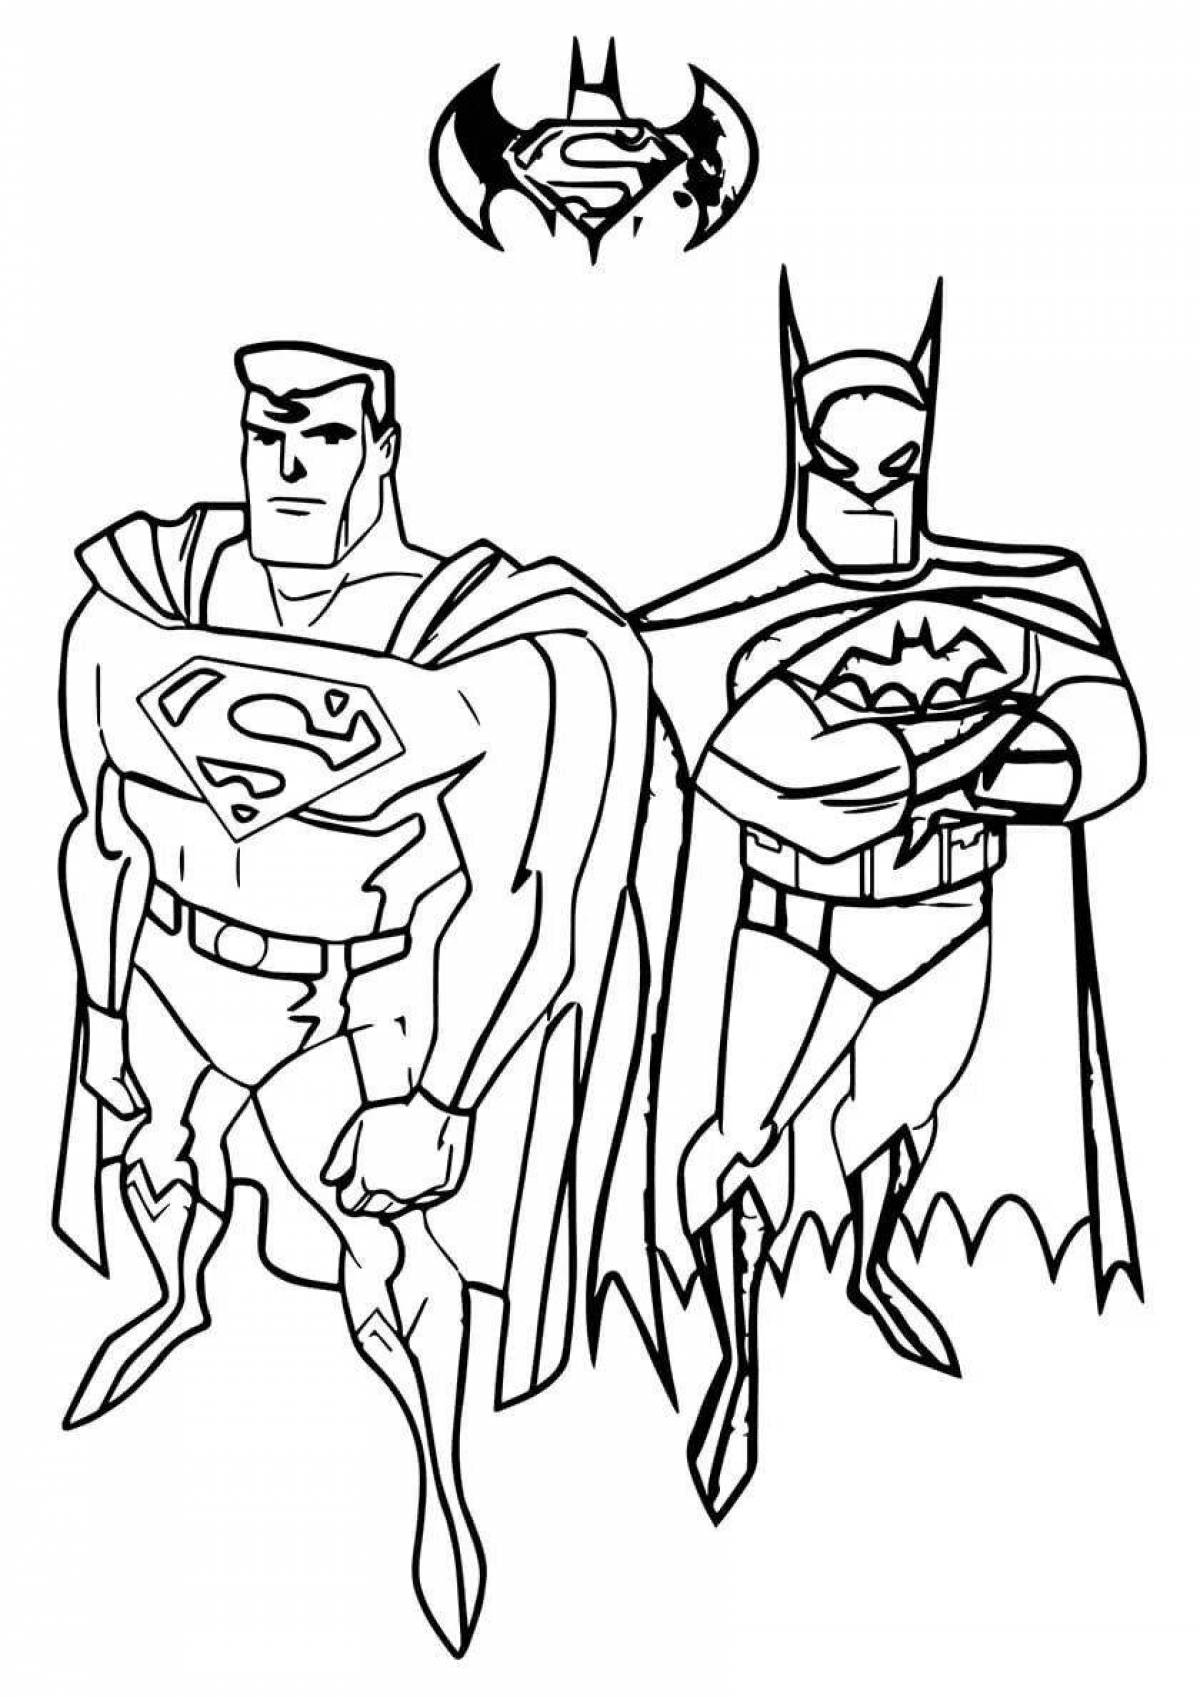 Amazing superhero coloring pages for 5 year old boys